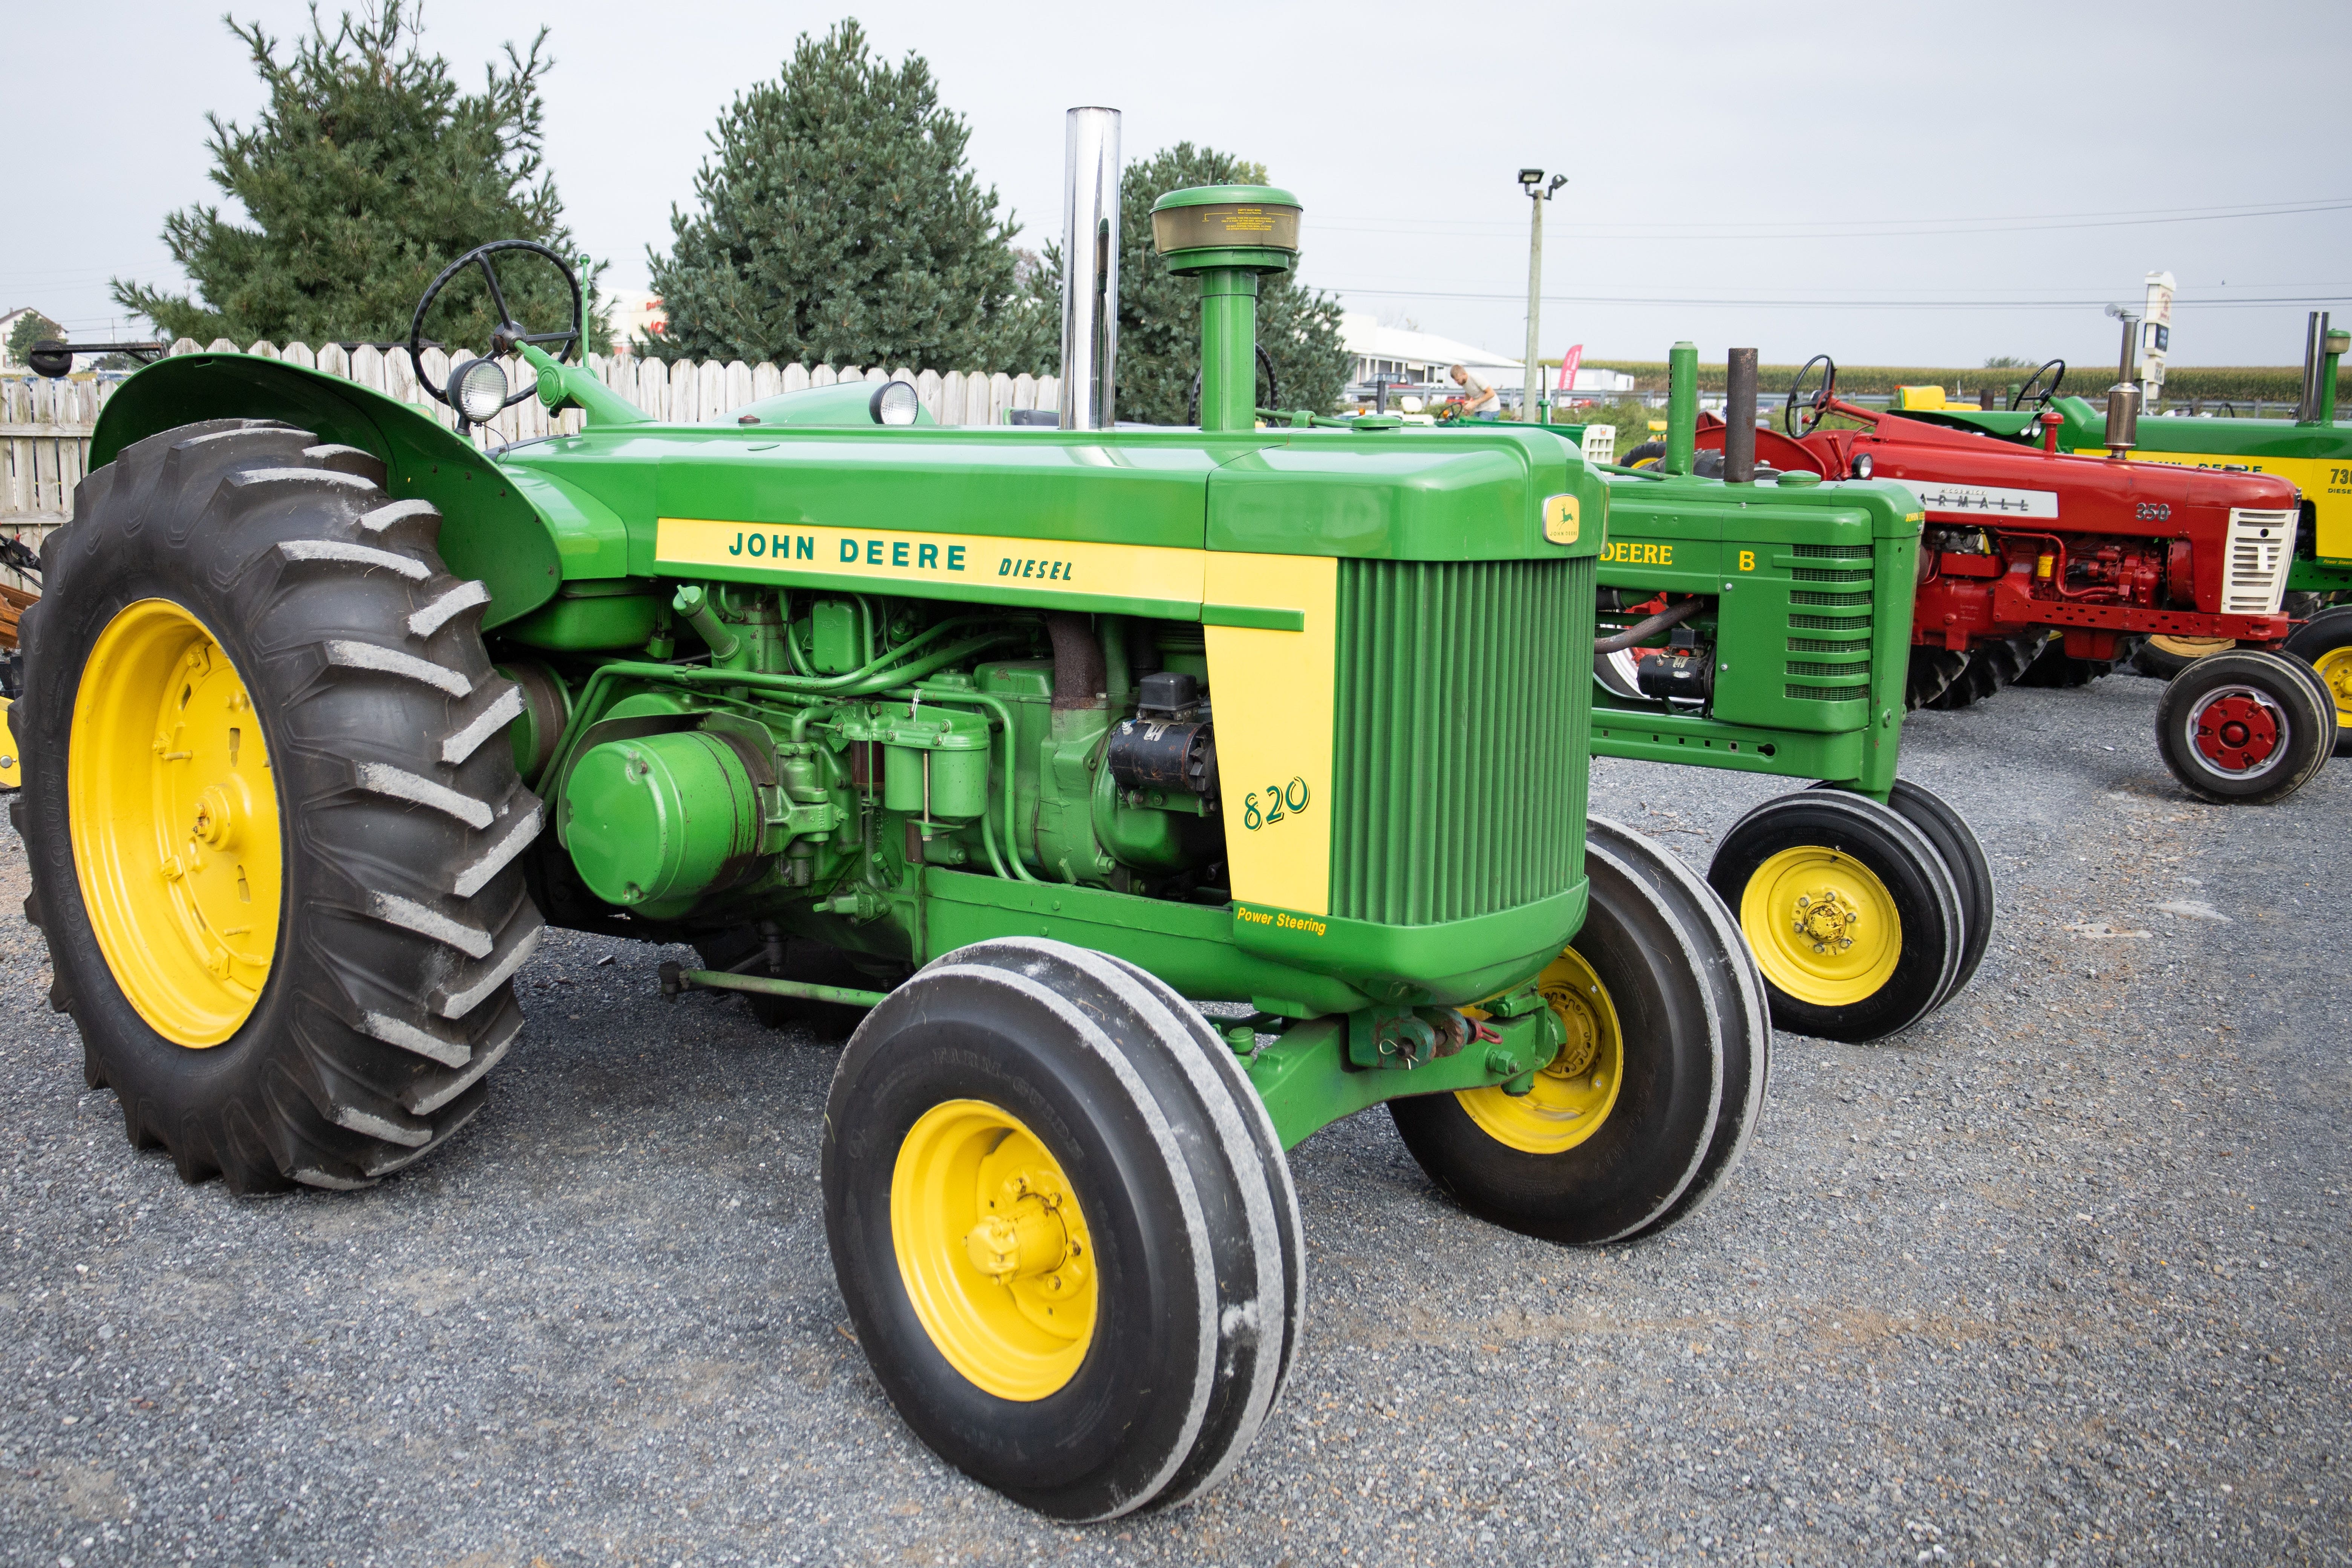 Deere & Company Shares Could Uptrend After Q3 Results: Revealing Options Activity